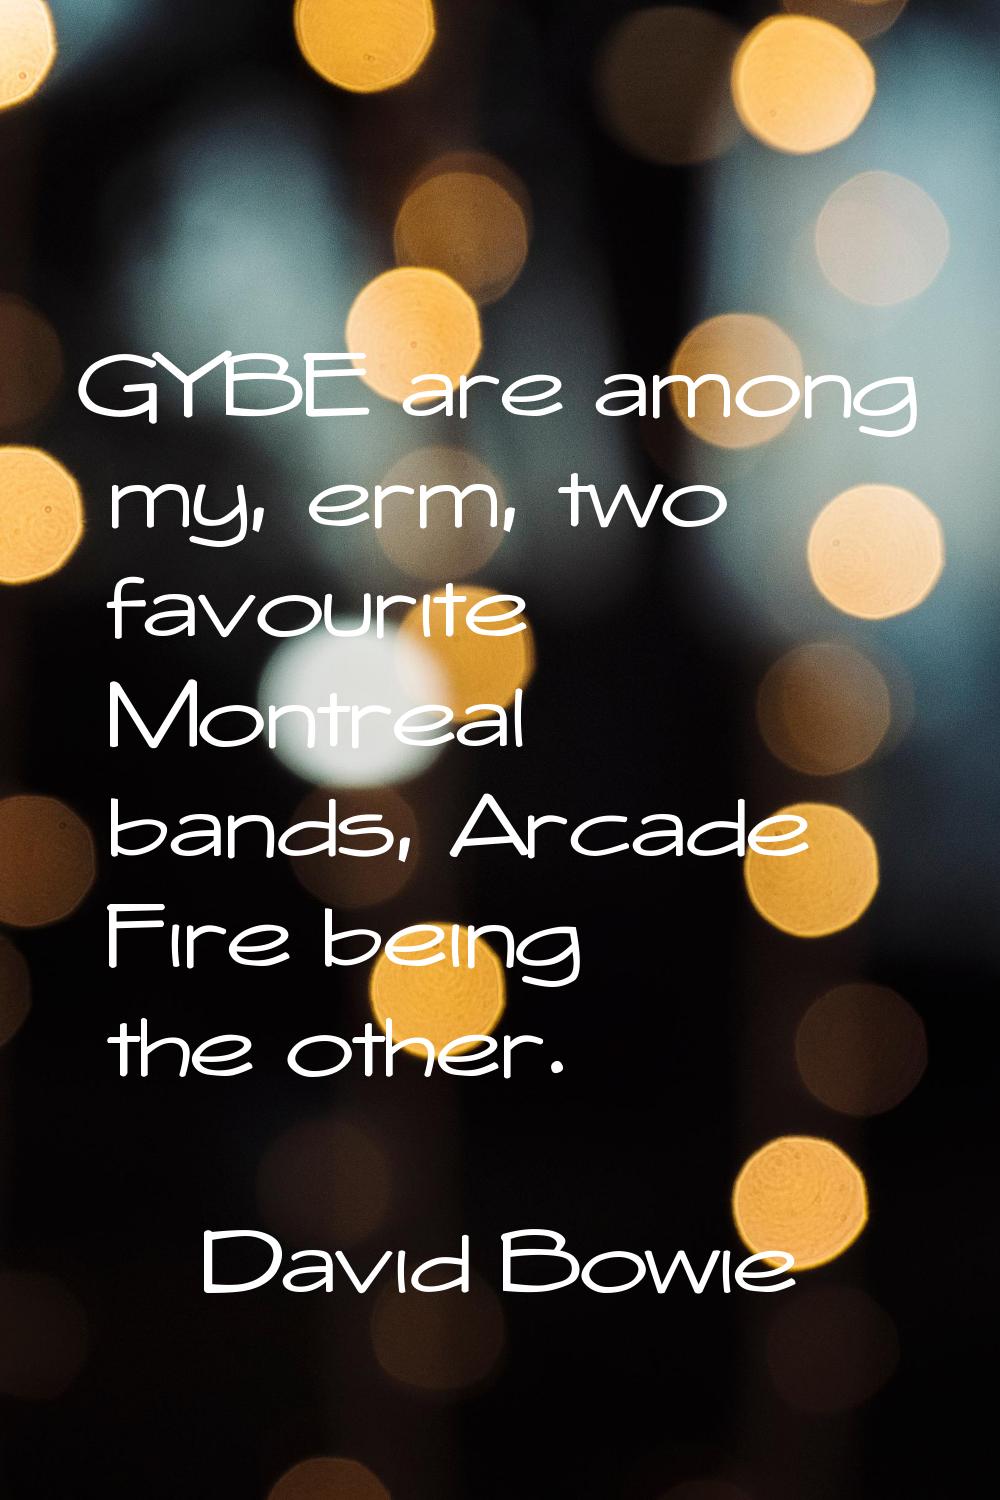 GYBE are among my, erm, two favourite Montreal bands, Arcade Fire being the other.